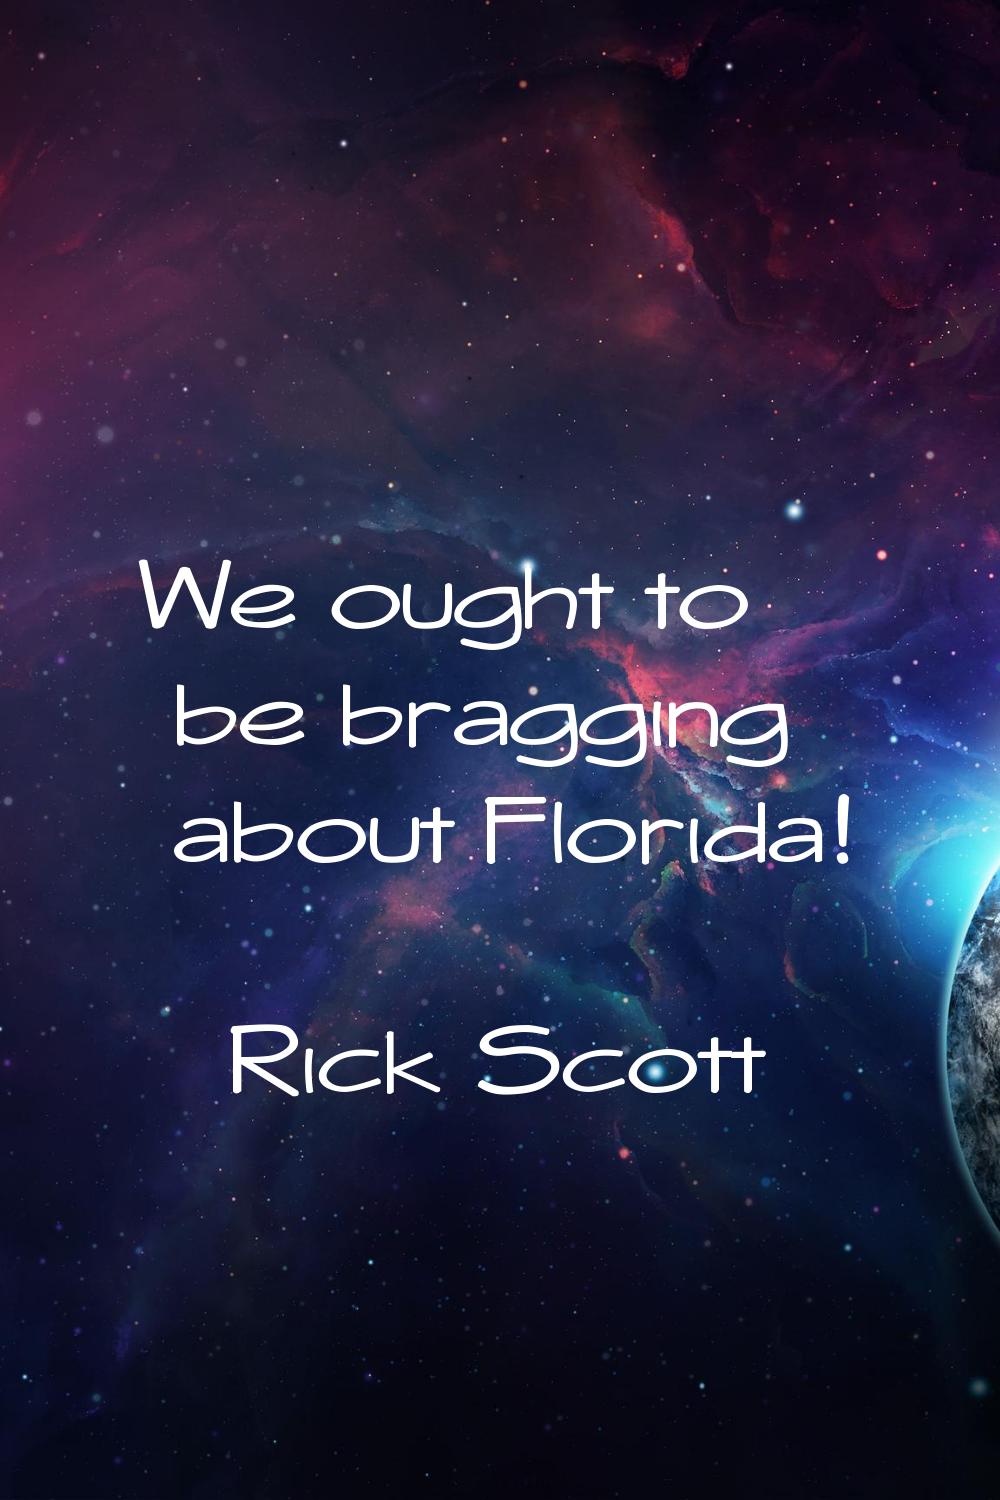 We ought to be bragging about Florida!